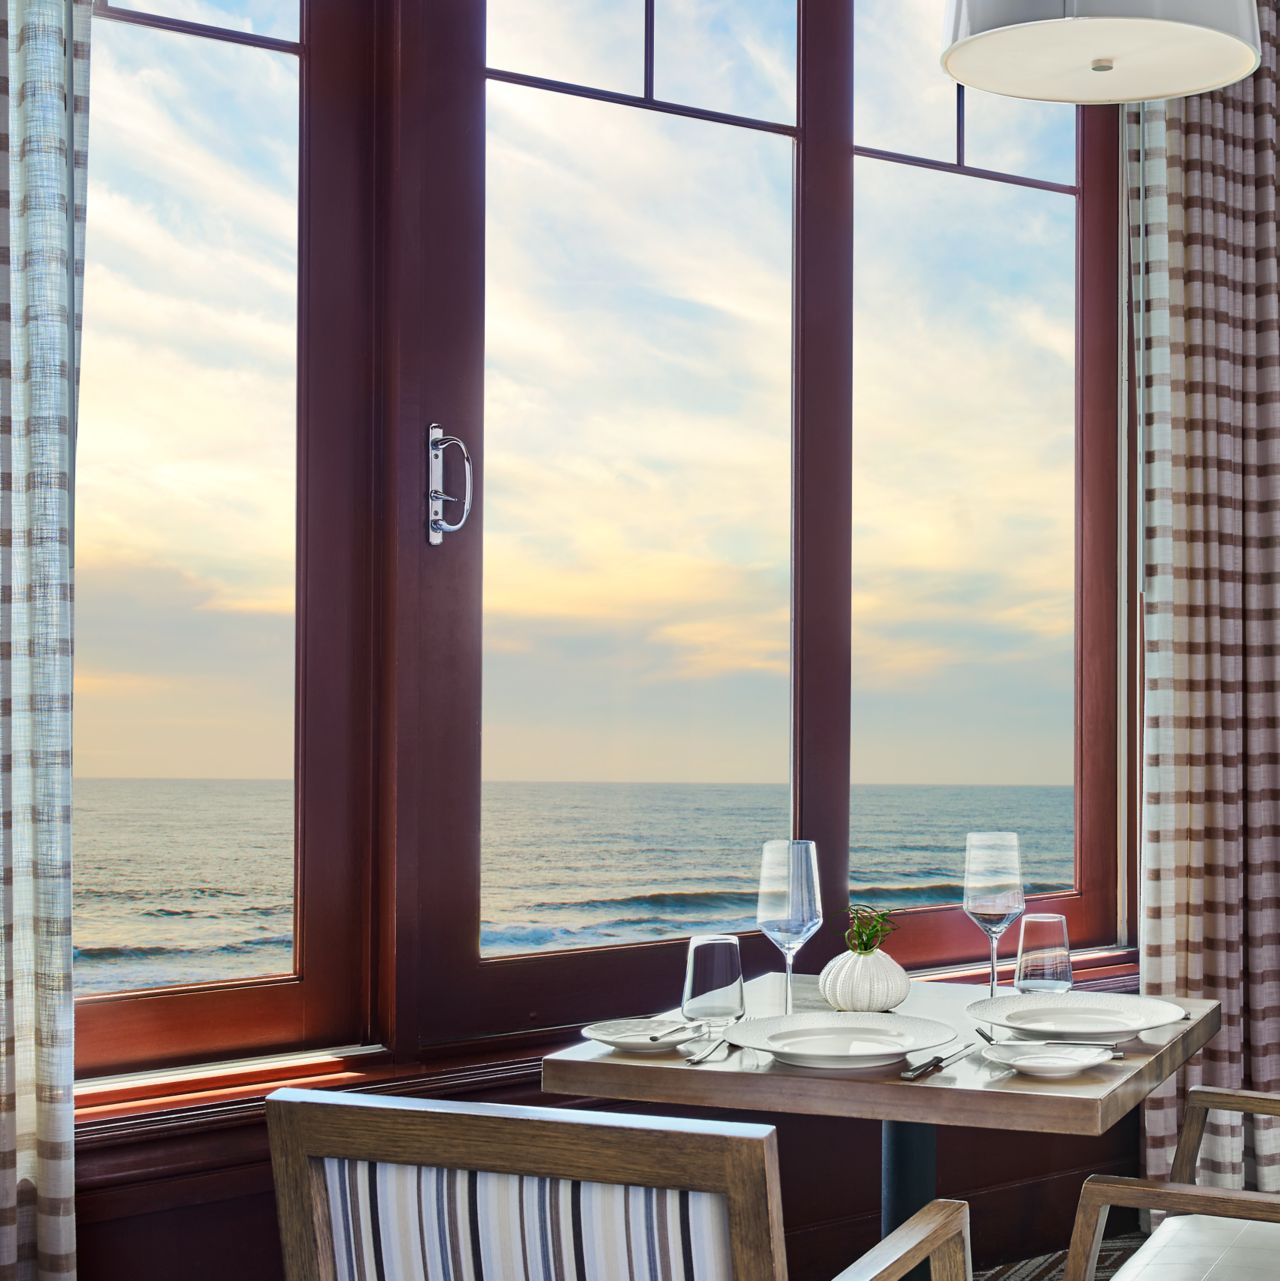 Square table with two armchairs, wine and a plate of food next to a window overlooking the ocean